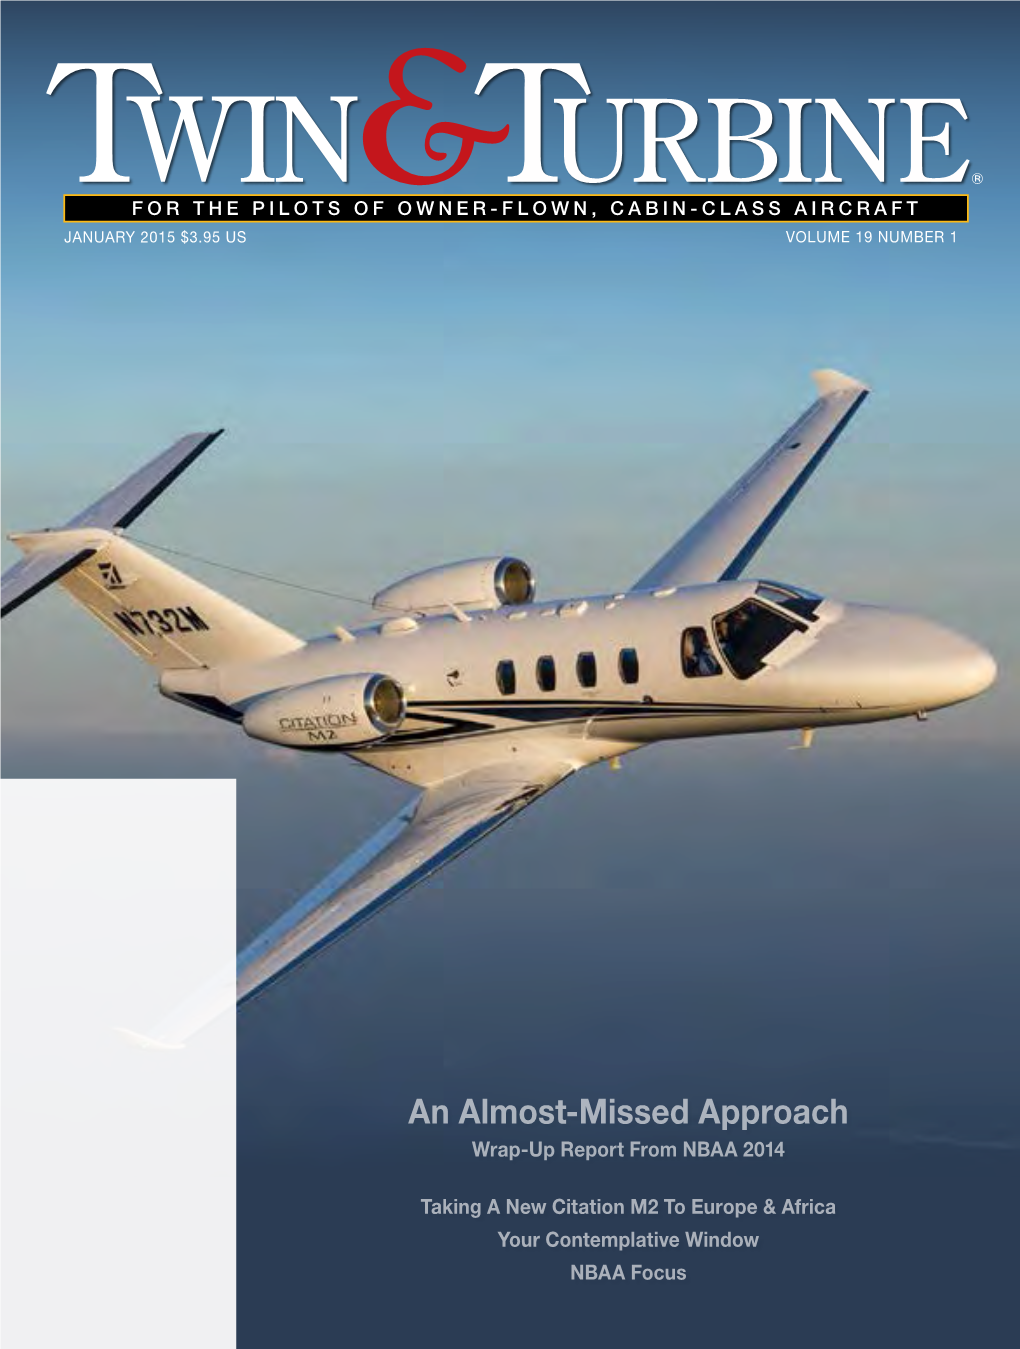 An Almost-Missed Approach Wrap-Up Report from NBAA 2014